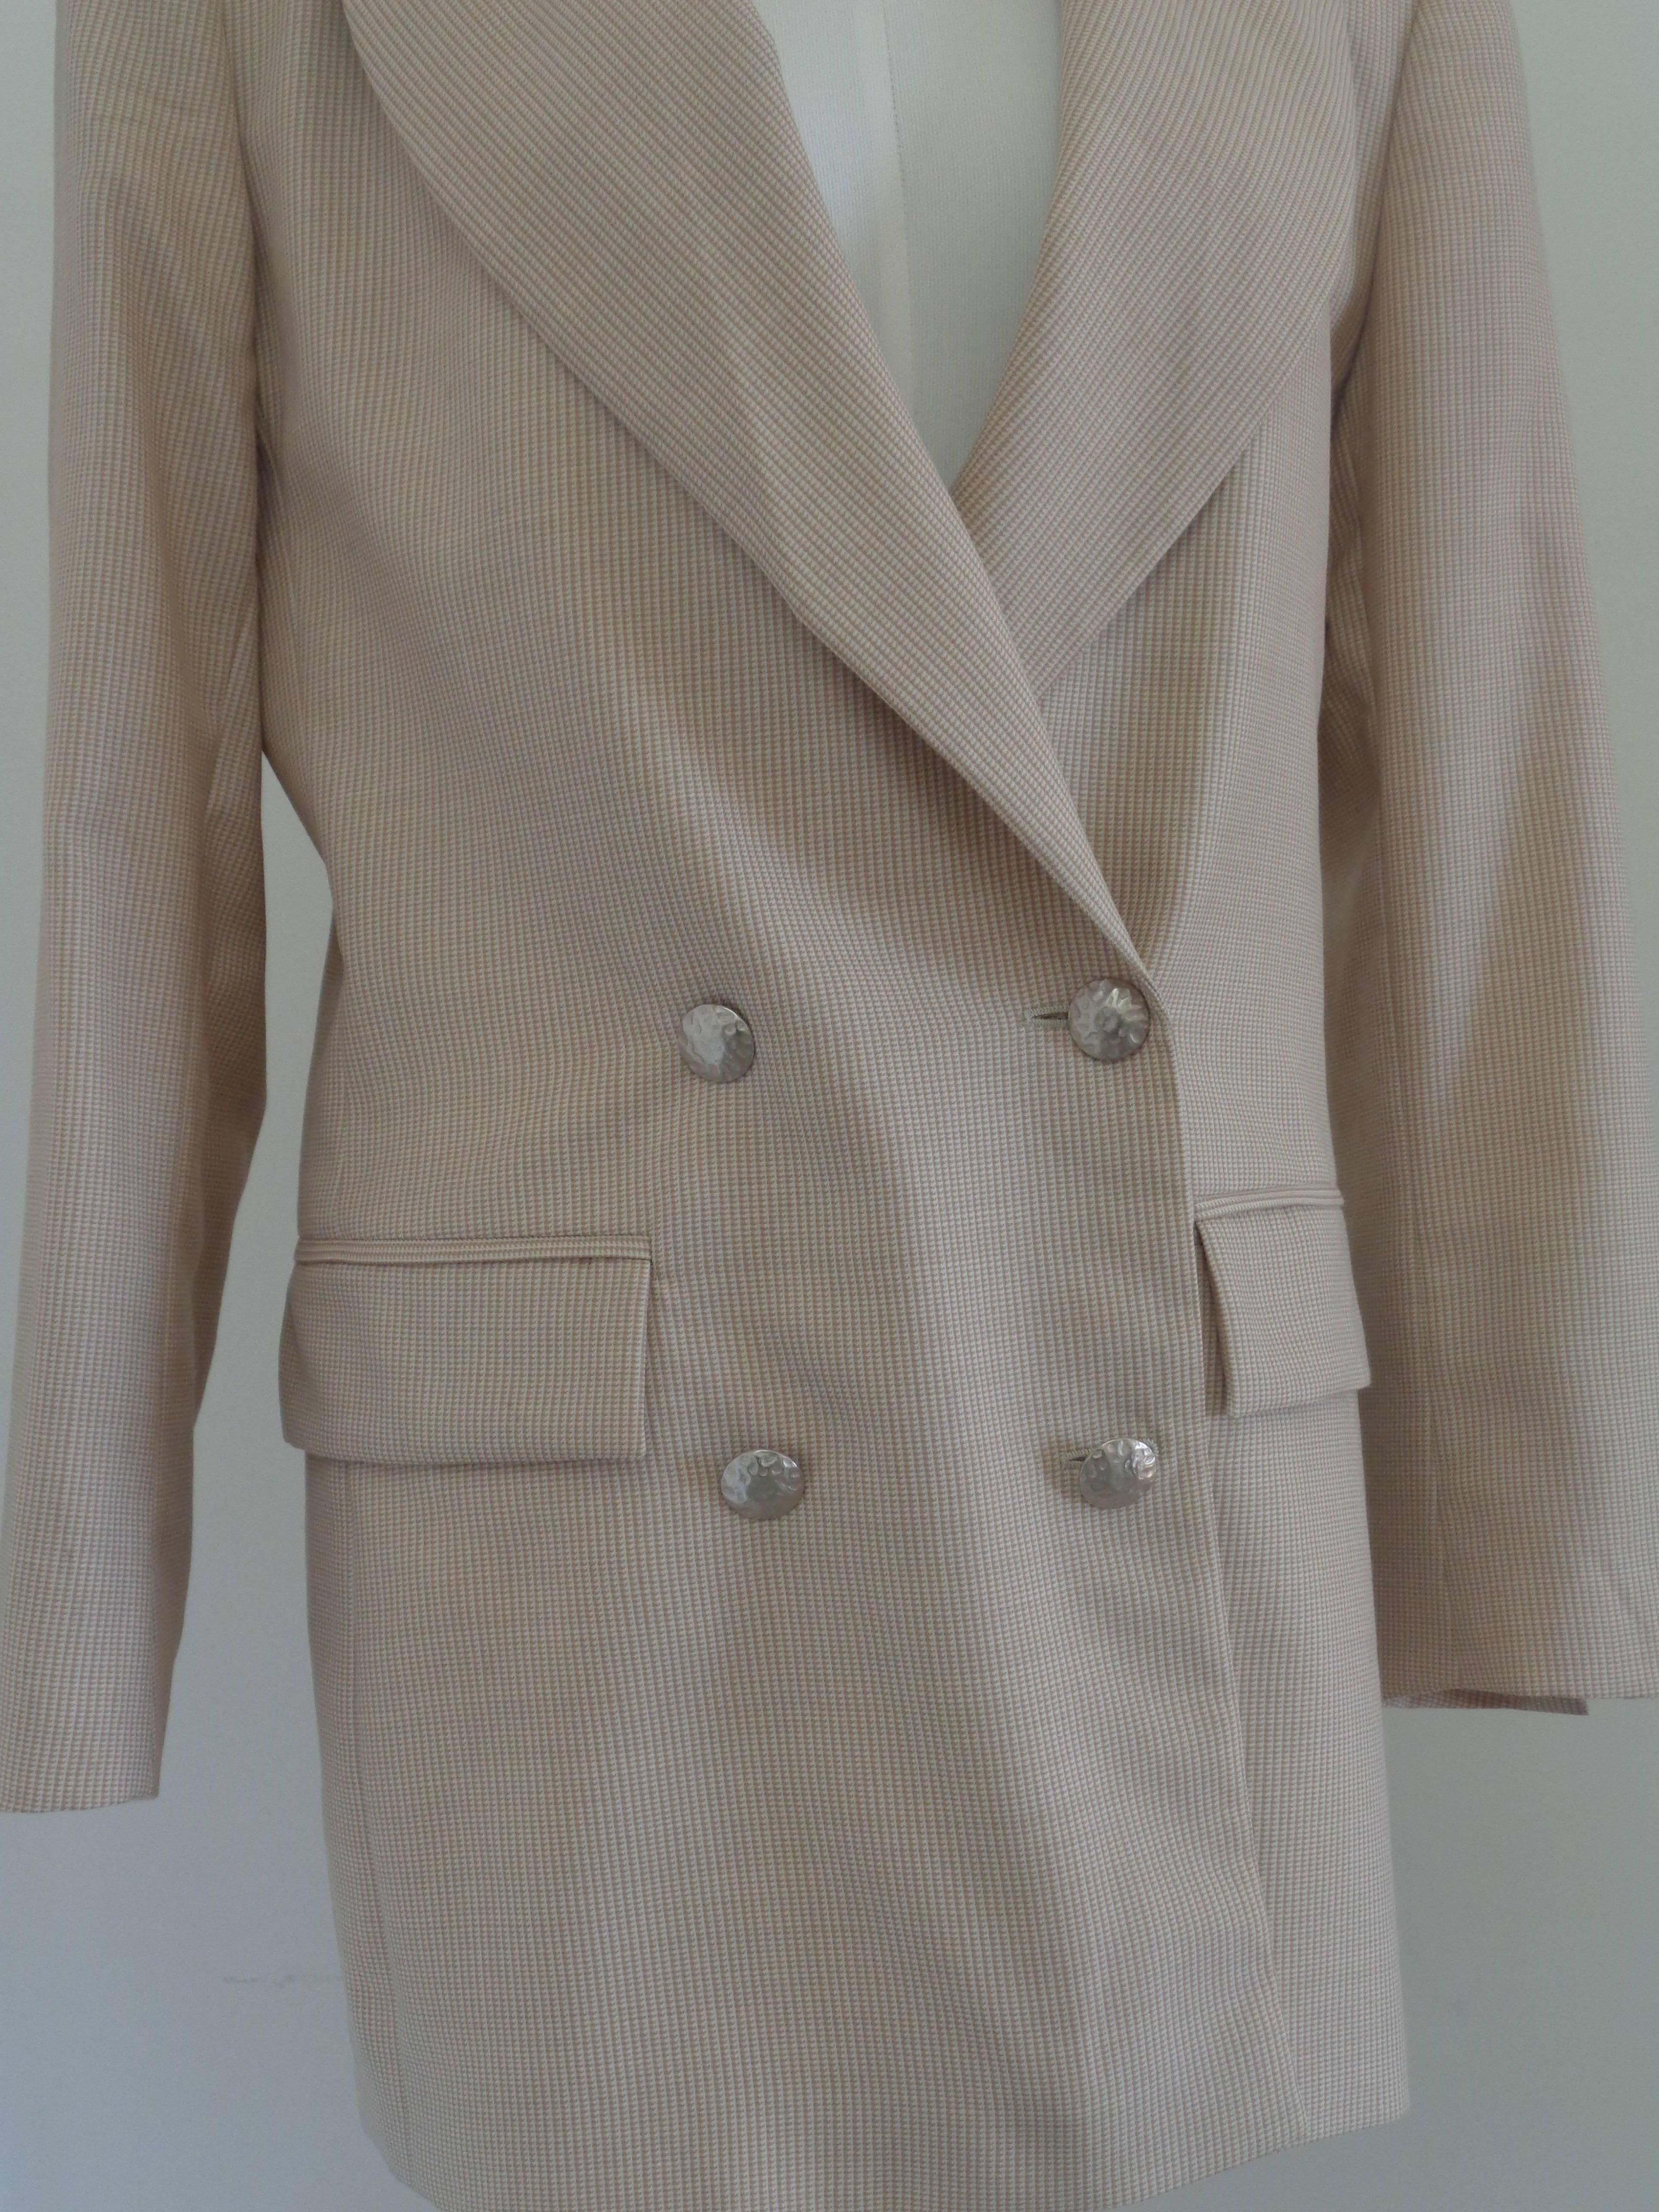 Christian Dior Cordonnes Wool Jacket

Totally made in italy in italian size range 42